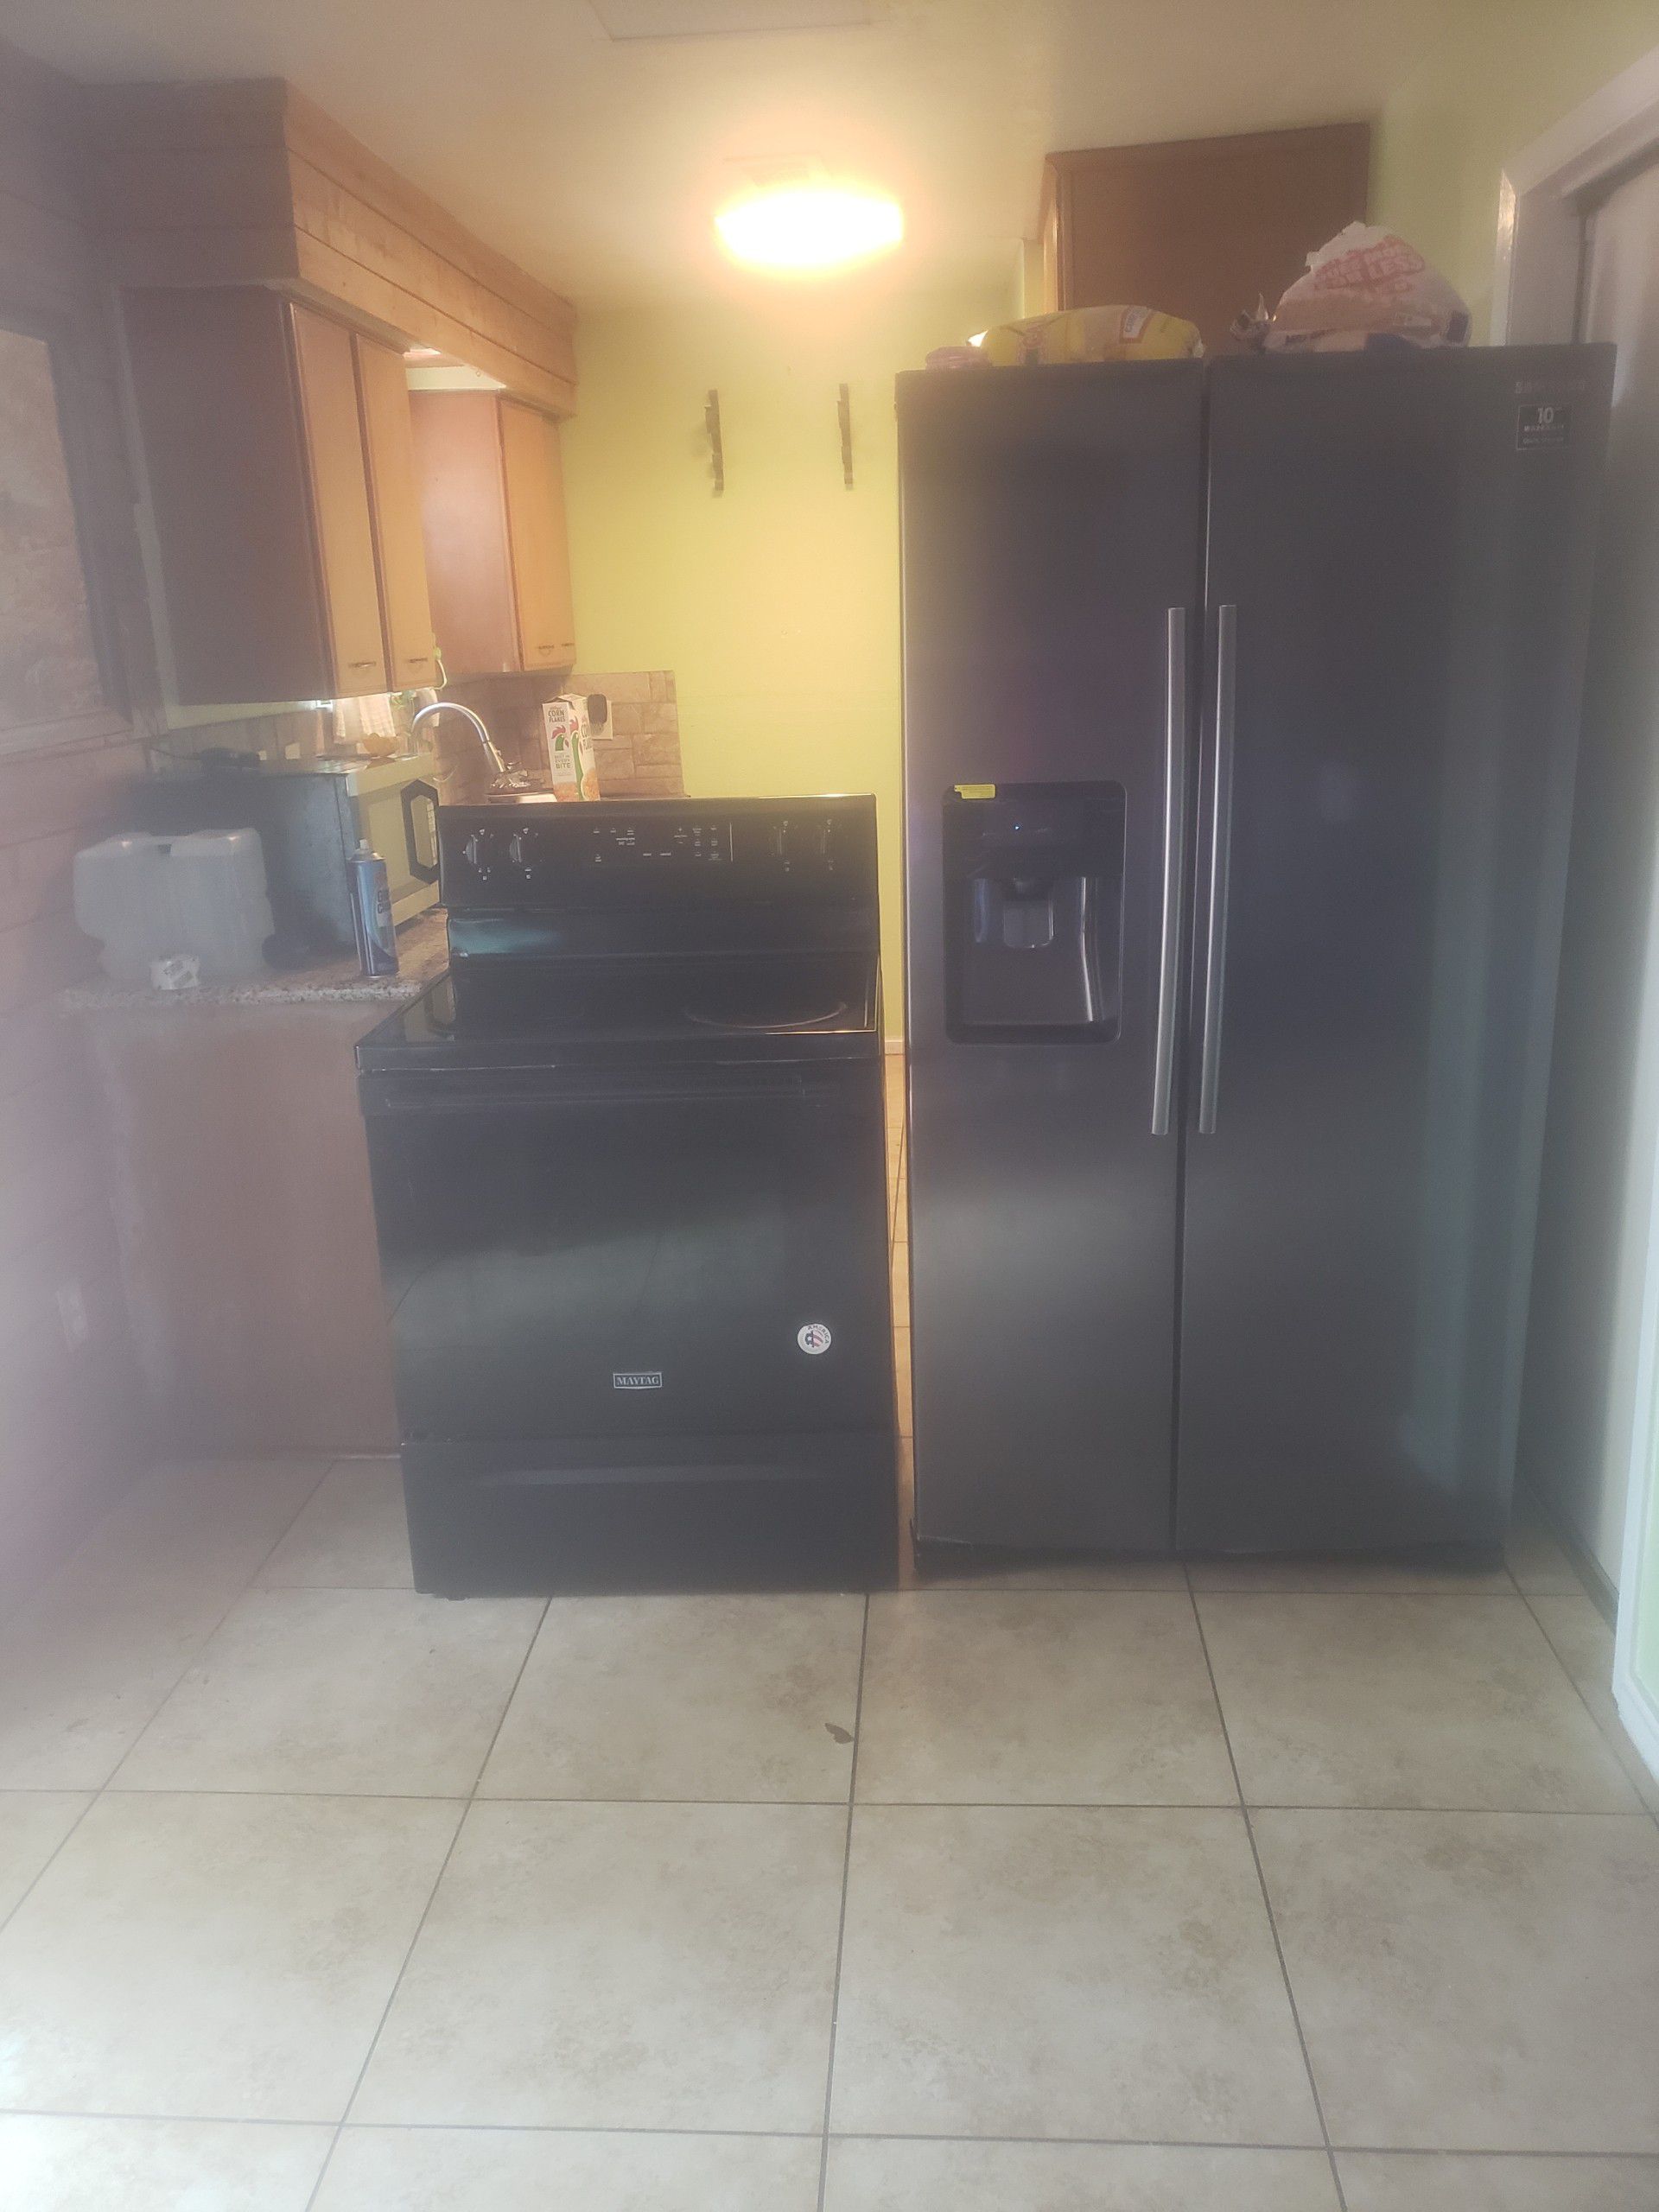 Stove and side by side refrigerator